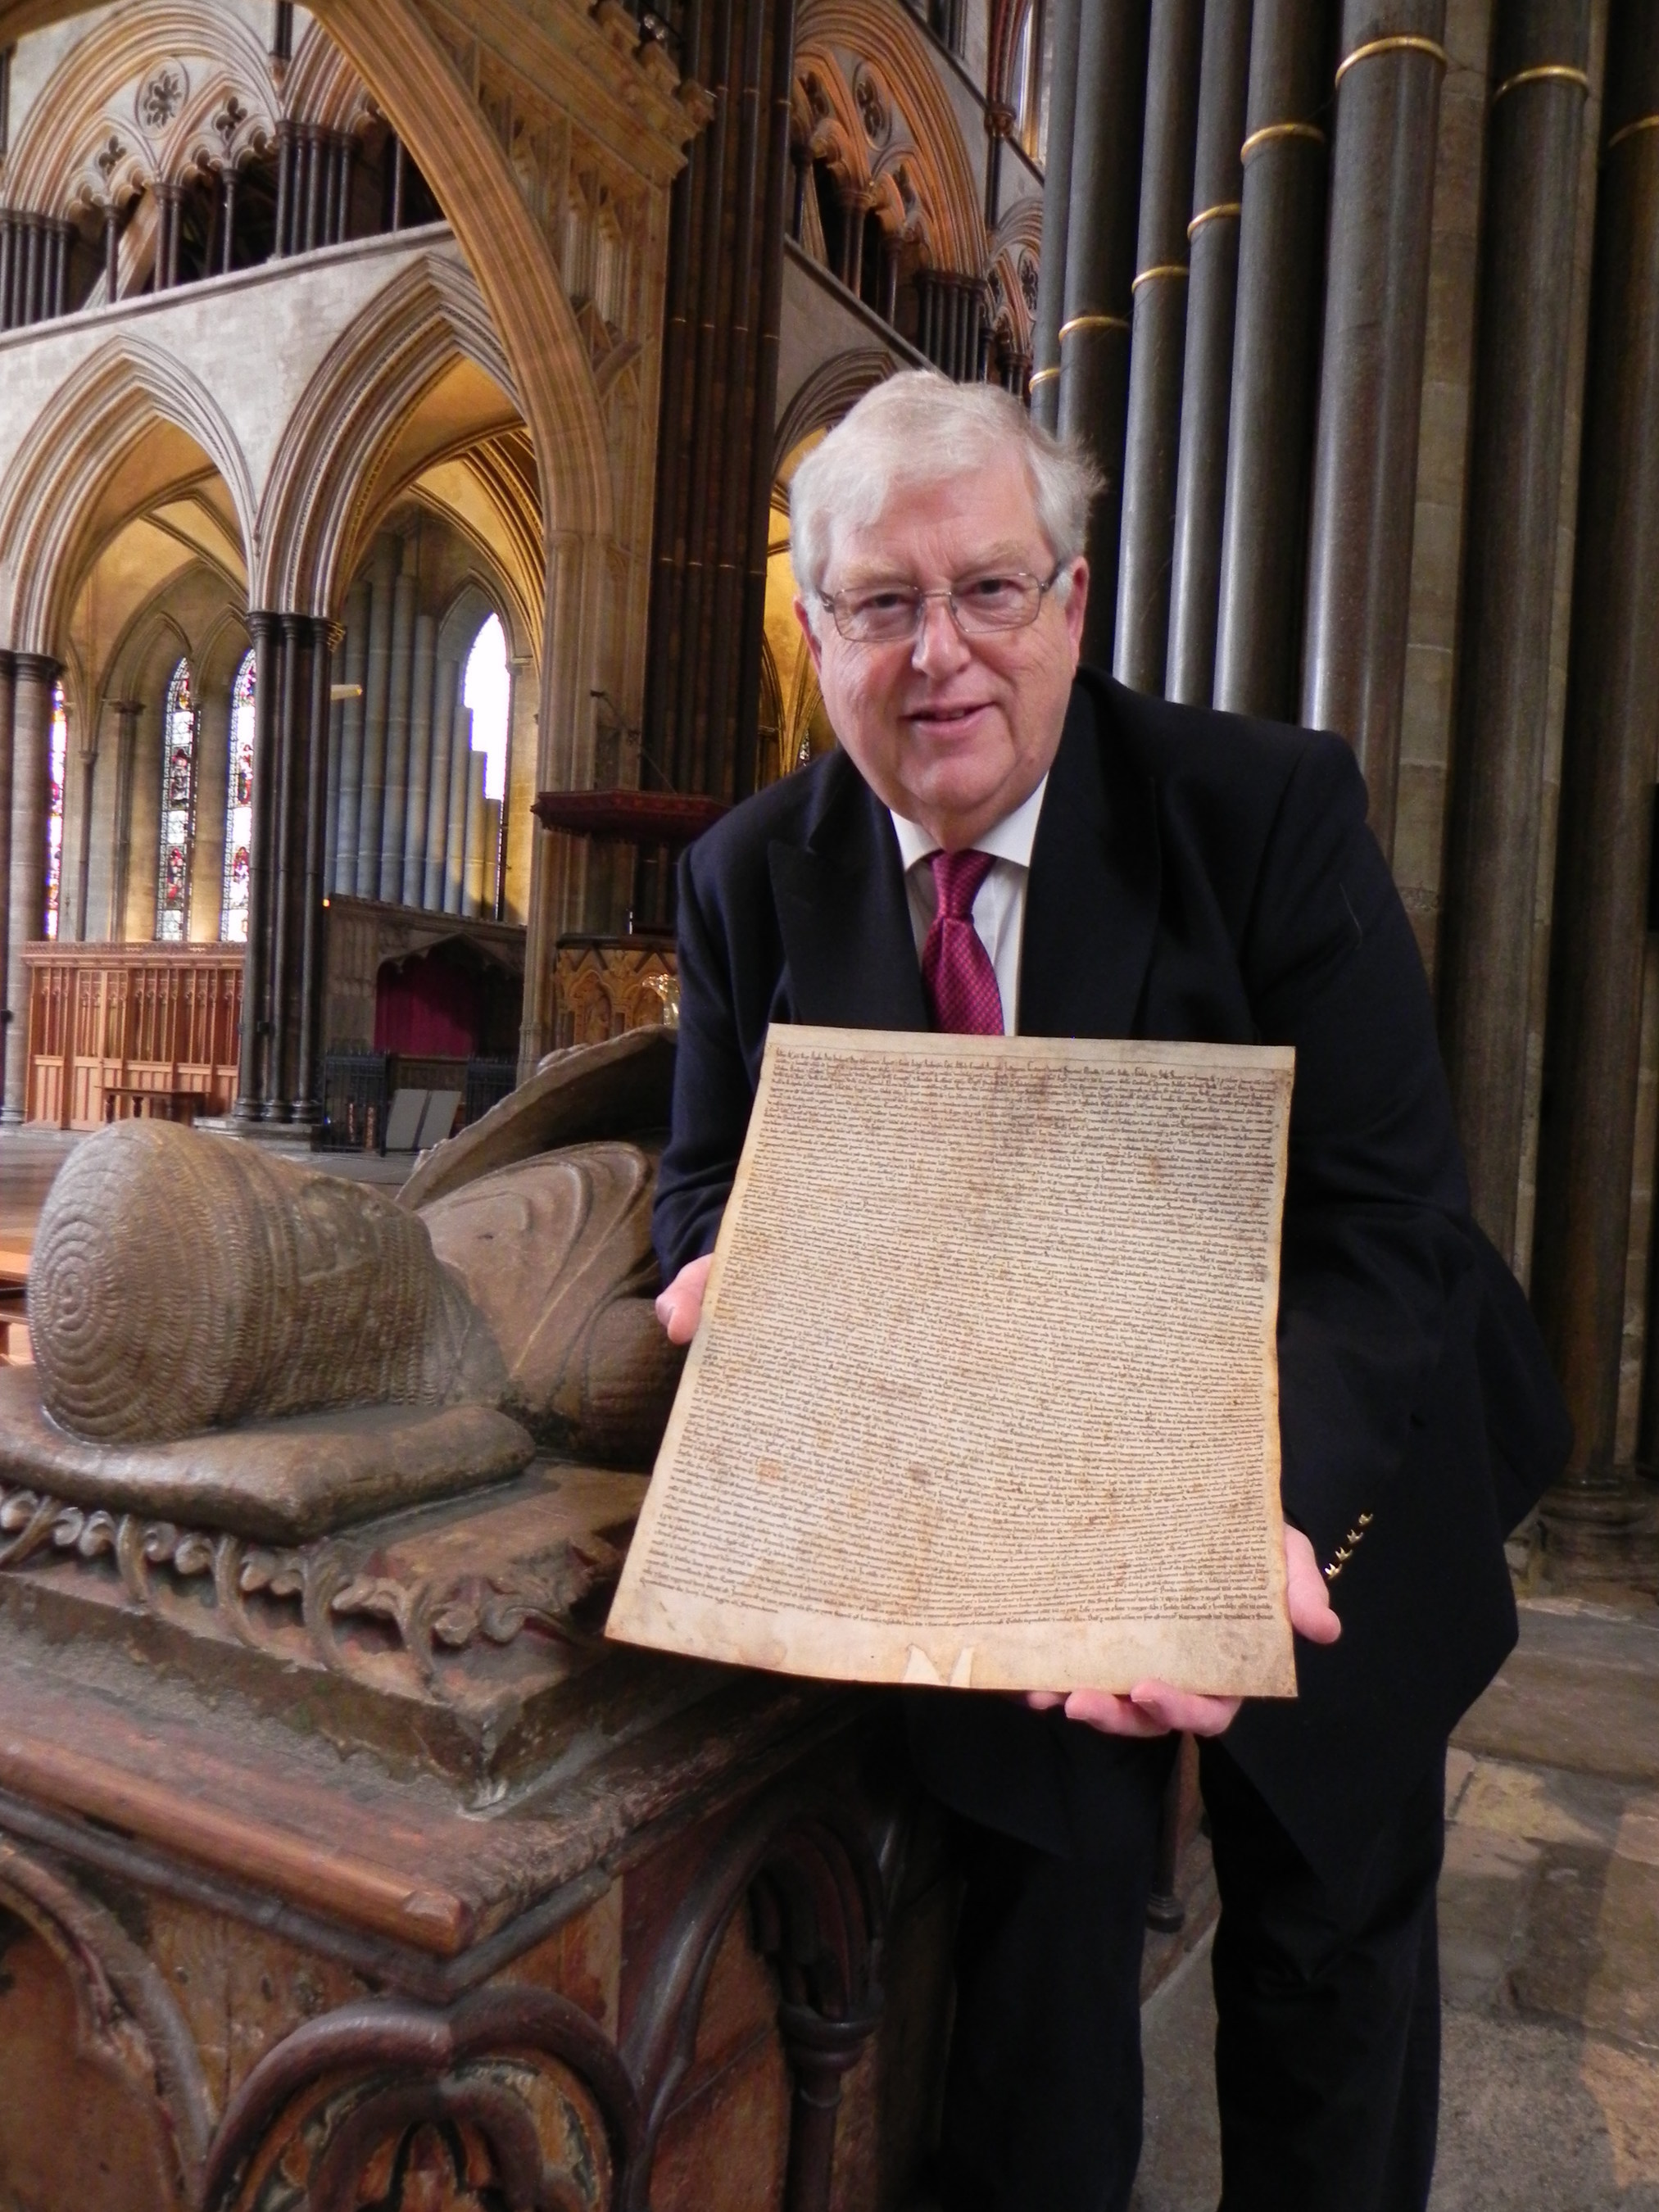 Robert Key with the Magna Carta copy at Salisbury Cathedral, at the tomb of William Longspee, half-brother of King John, who was at Runnymede on 15 June 1215. He was Earl of Salisbury and he was the first person to be buried in Salisbury Cathedral.